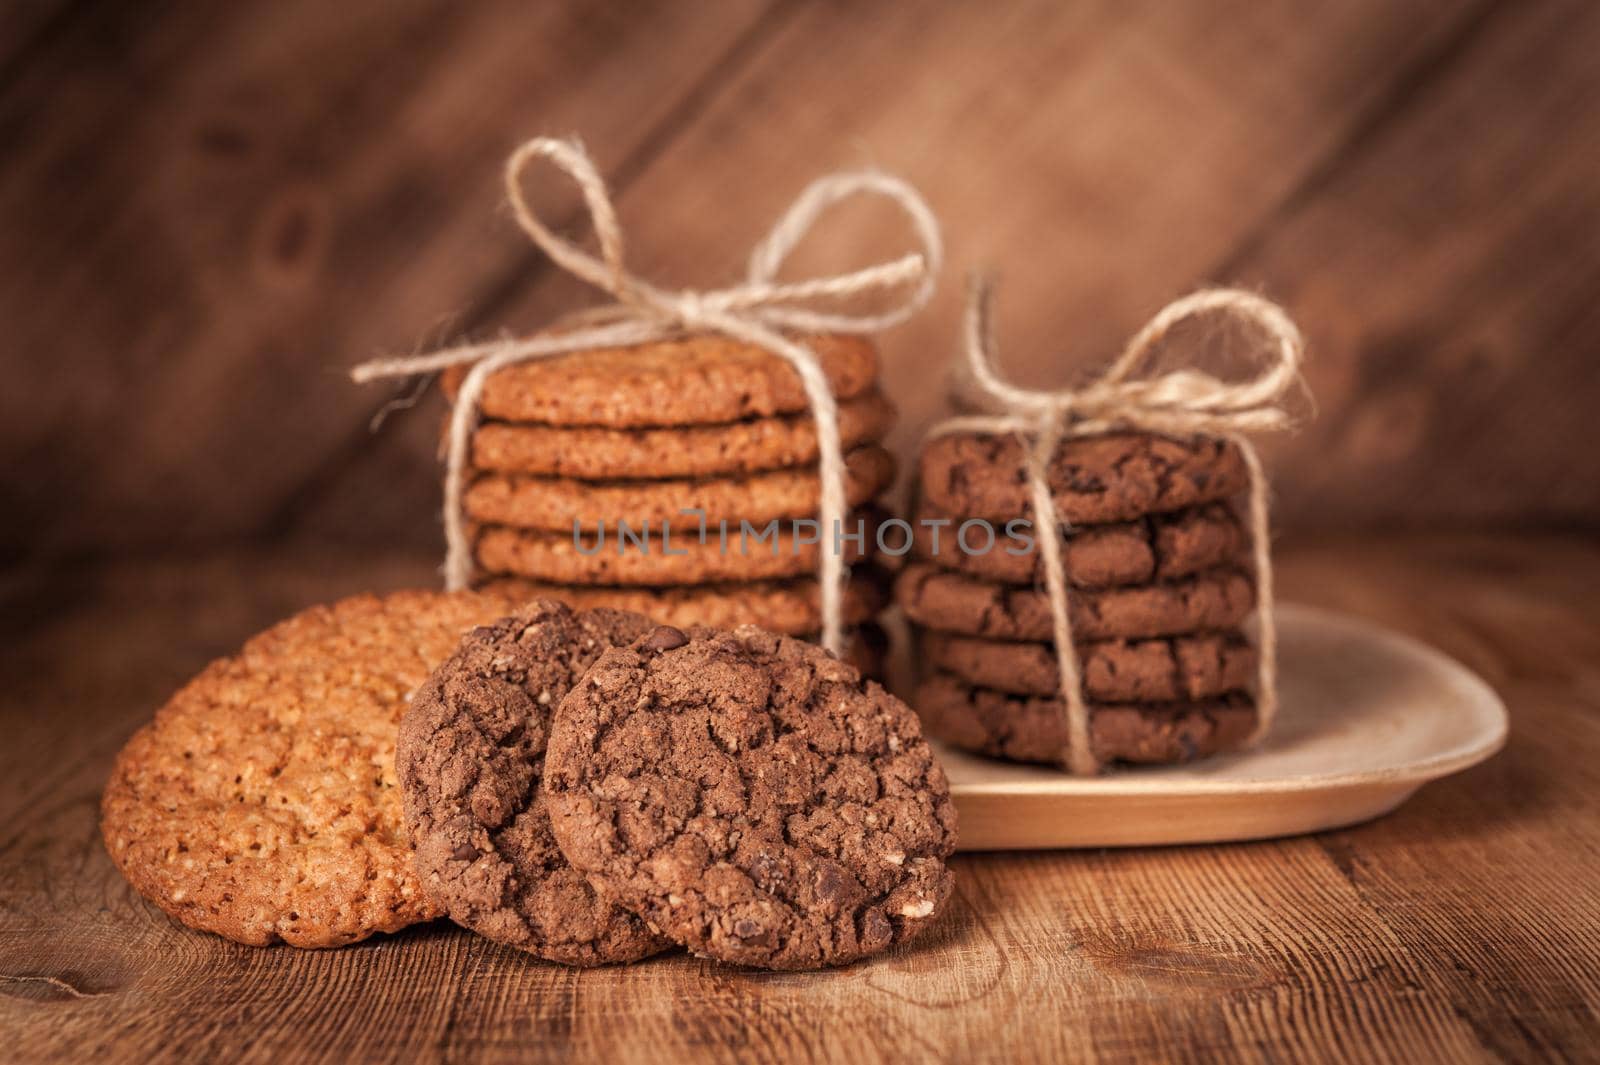 Homemade corded wholegrain cookies with oatmeal, linen and sesame seeds and traditional cookies with chocolate chips on dark rustic wooden table. Healthy vegan food concept.